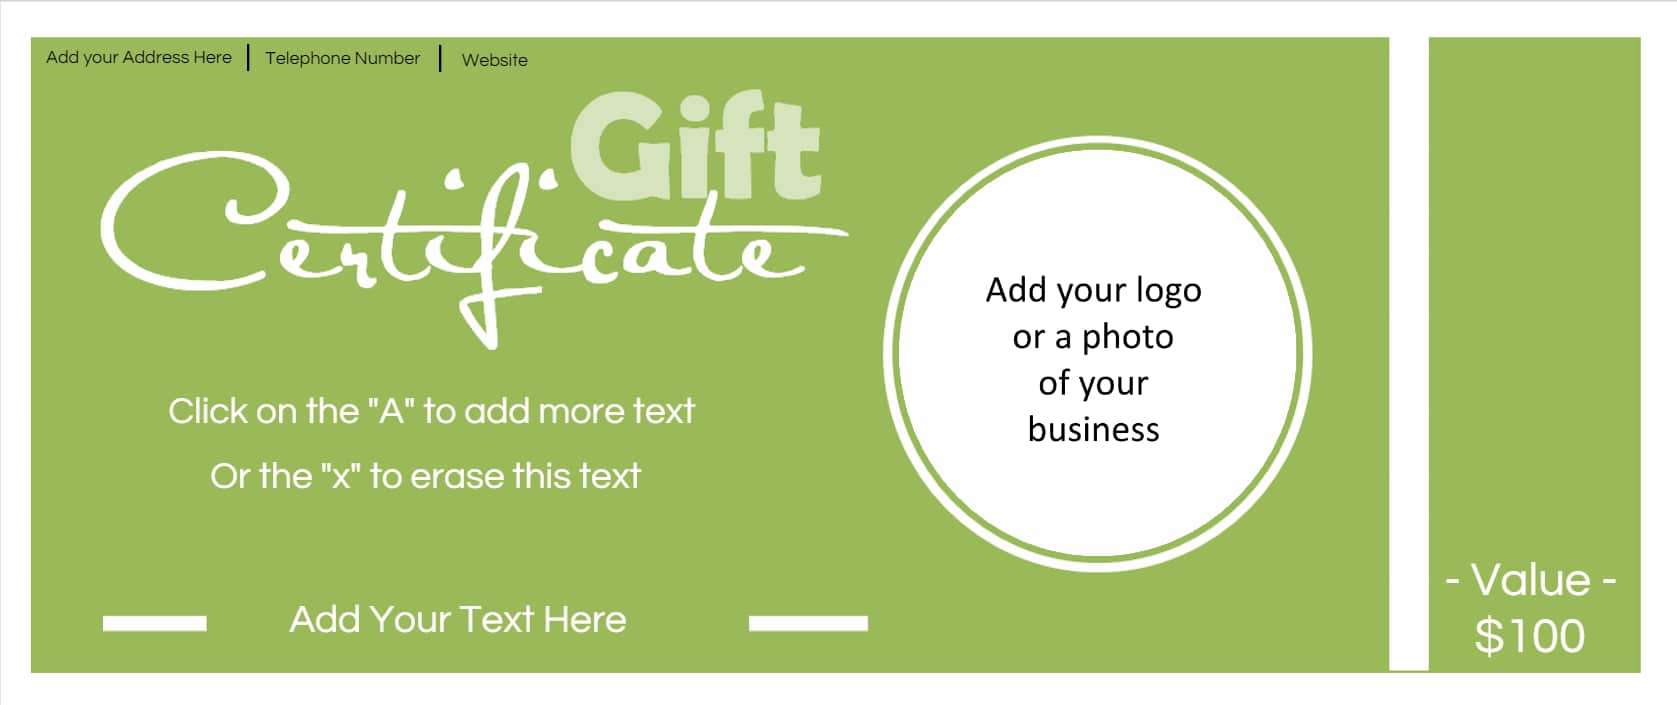 Free Template Gift Certificate from www.101giftcertificatetemplates.com